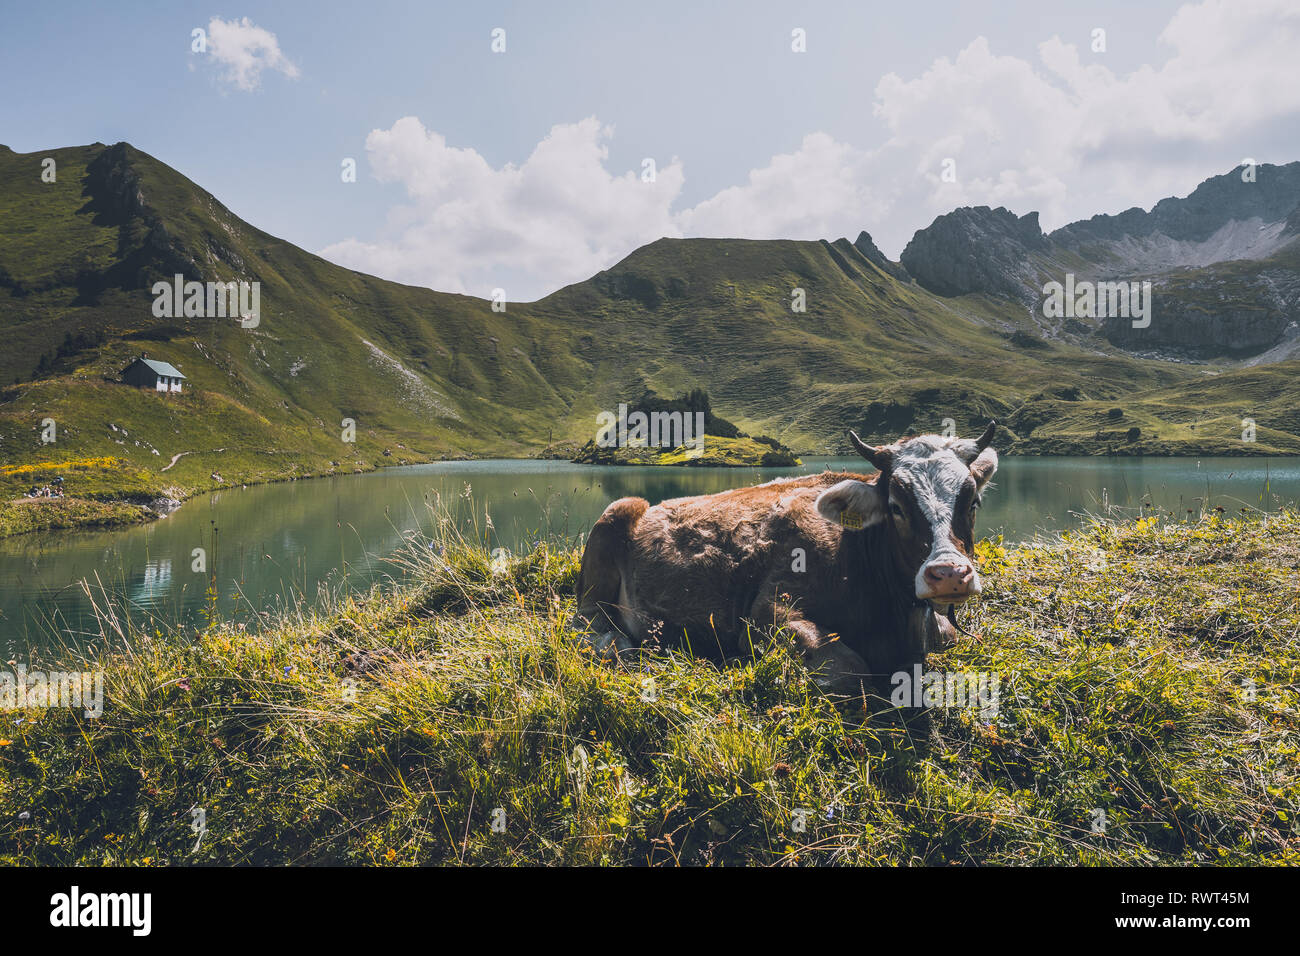 cattle in the mountains Stock Photo